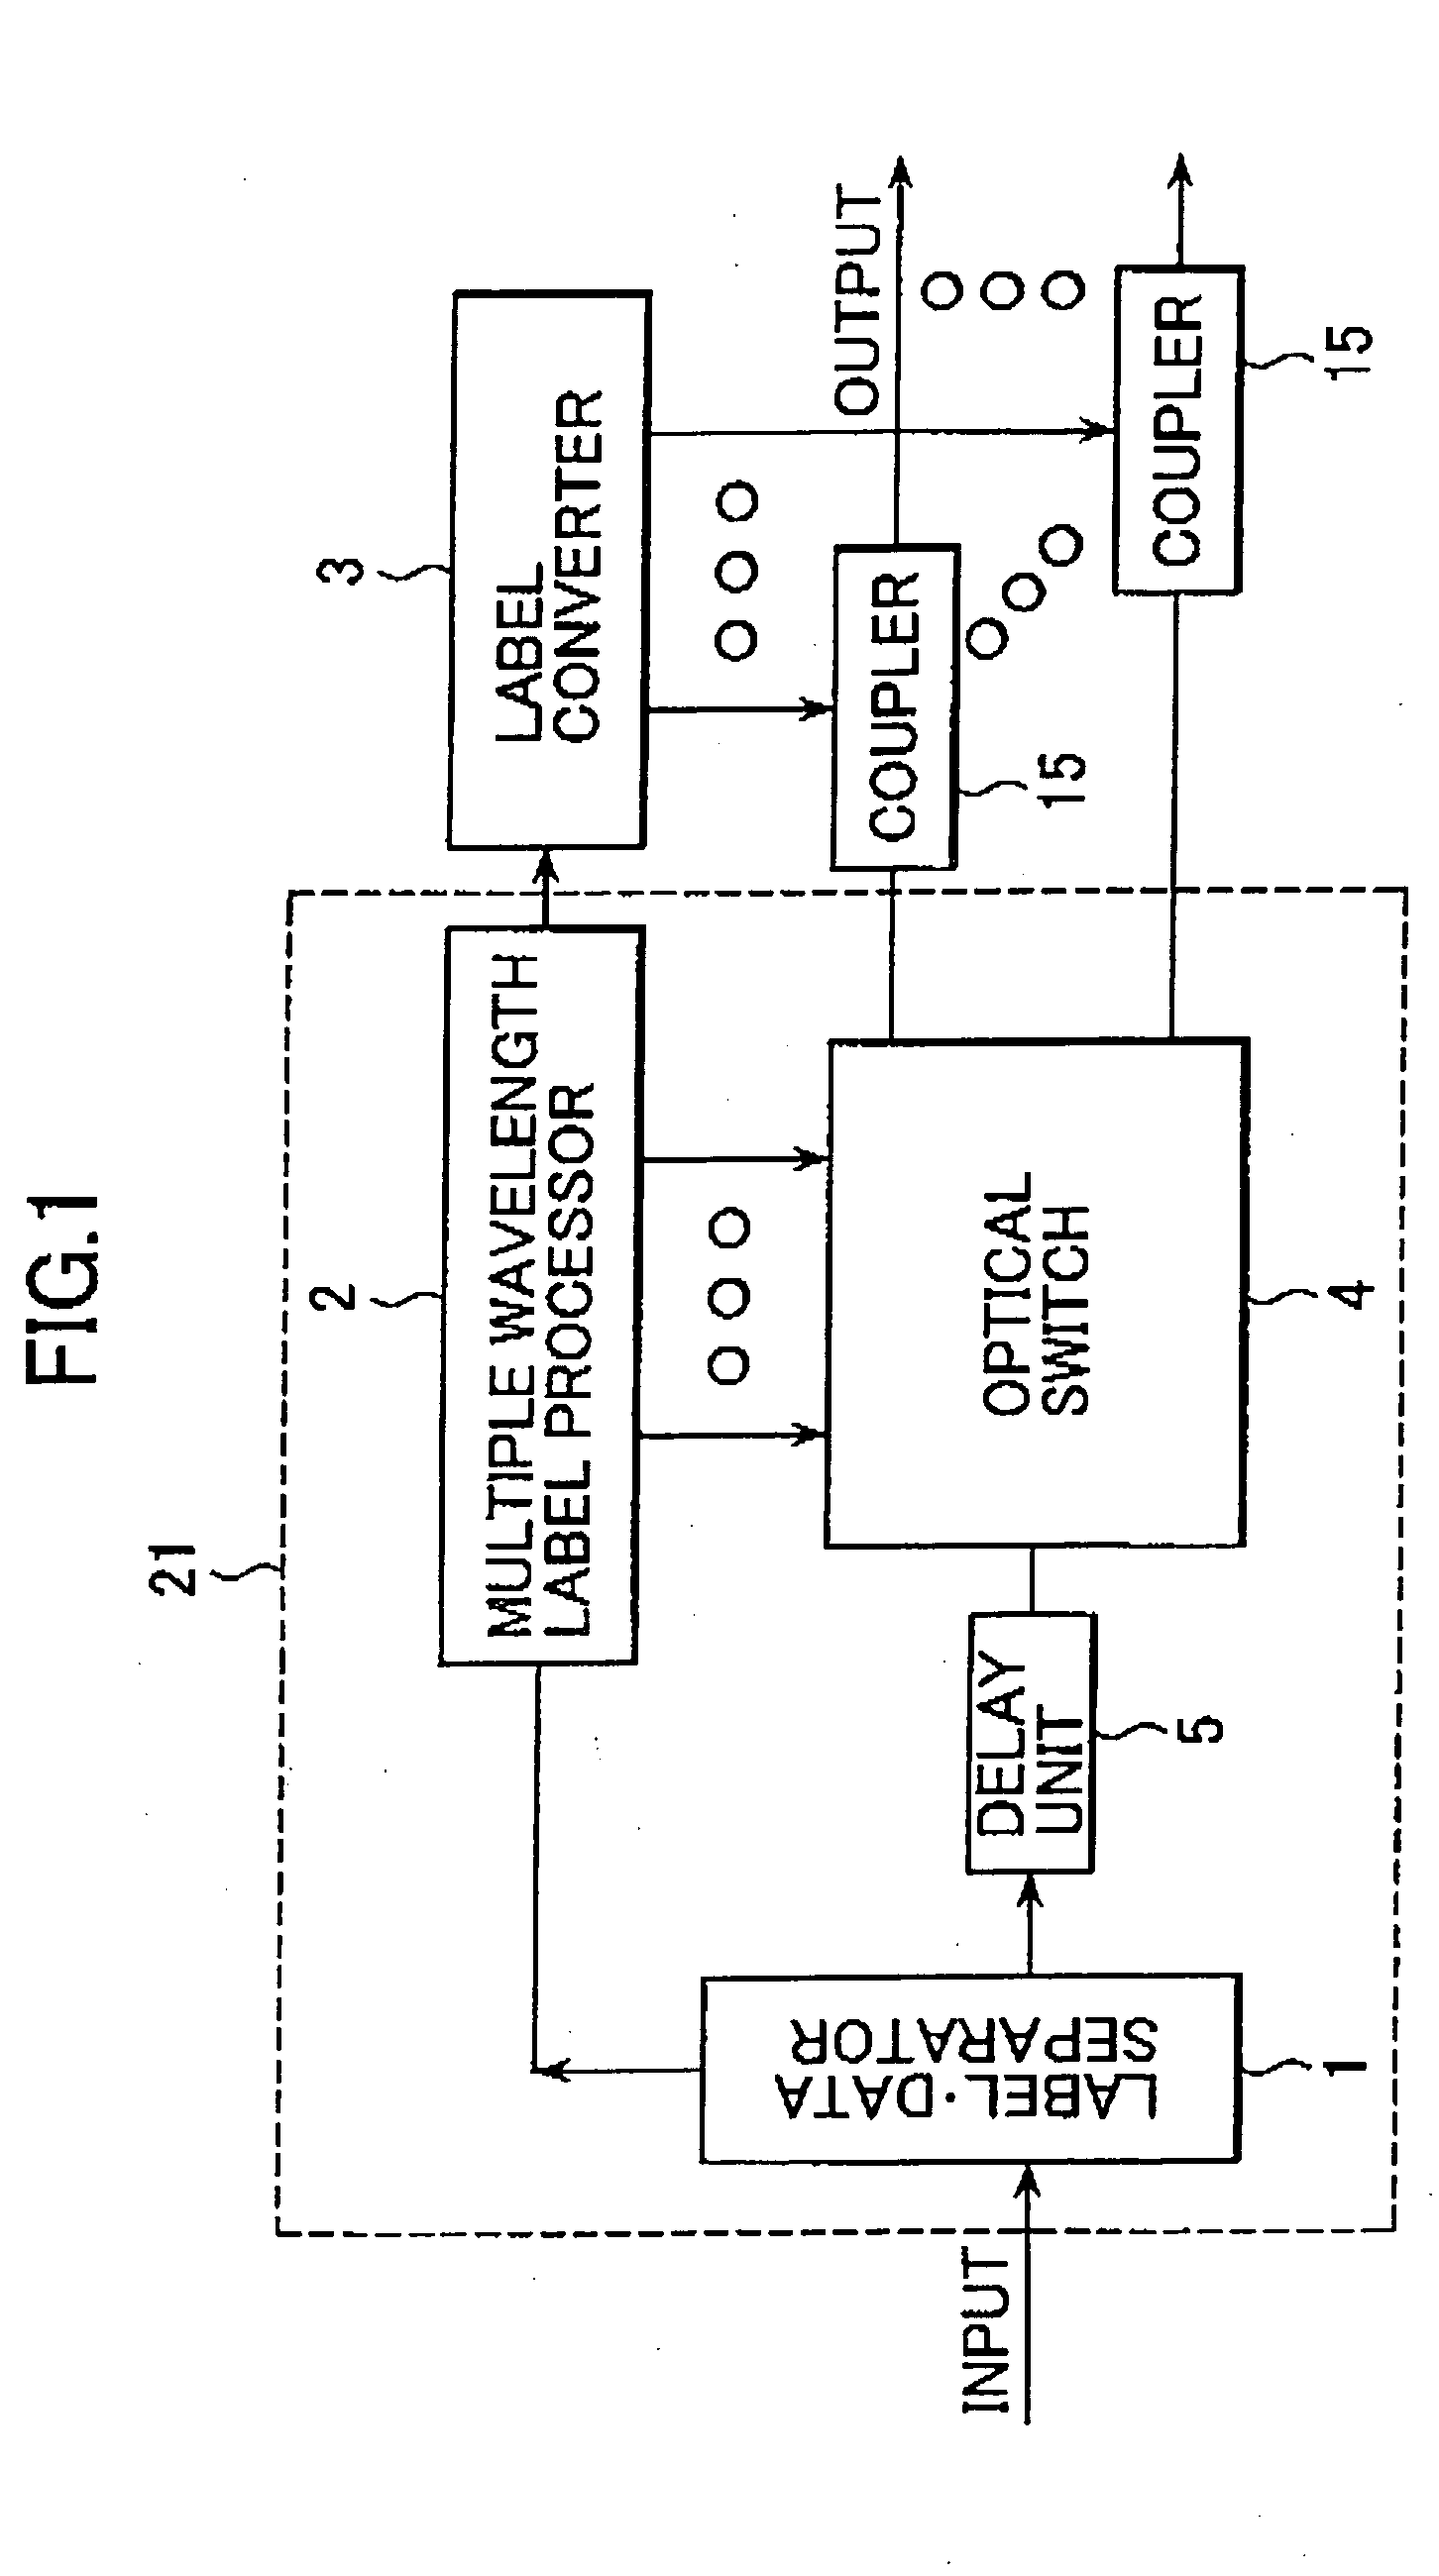 Method for routing optical packets using multiple wavelength labels, optical packet router using multiple wavelength labels, and optical packet network that uses multiple wavelength labels